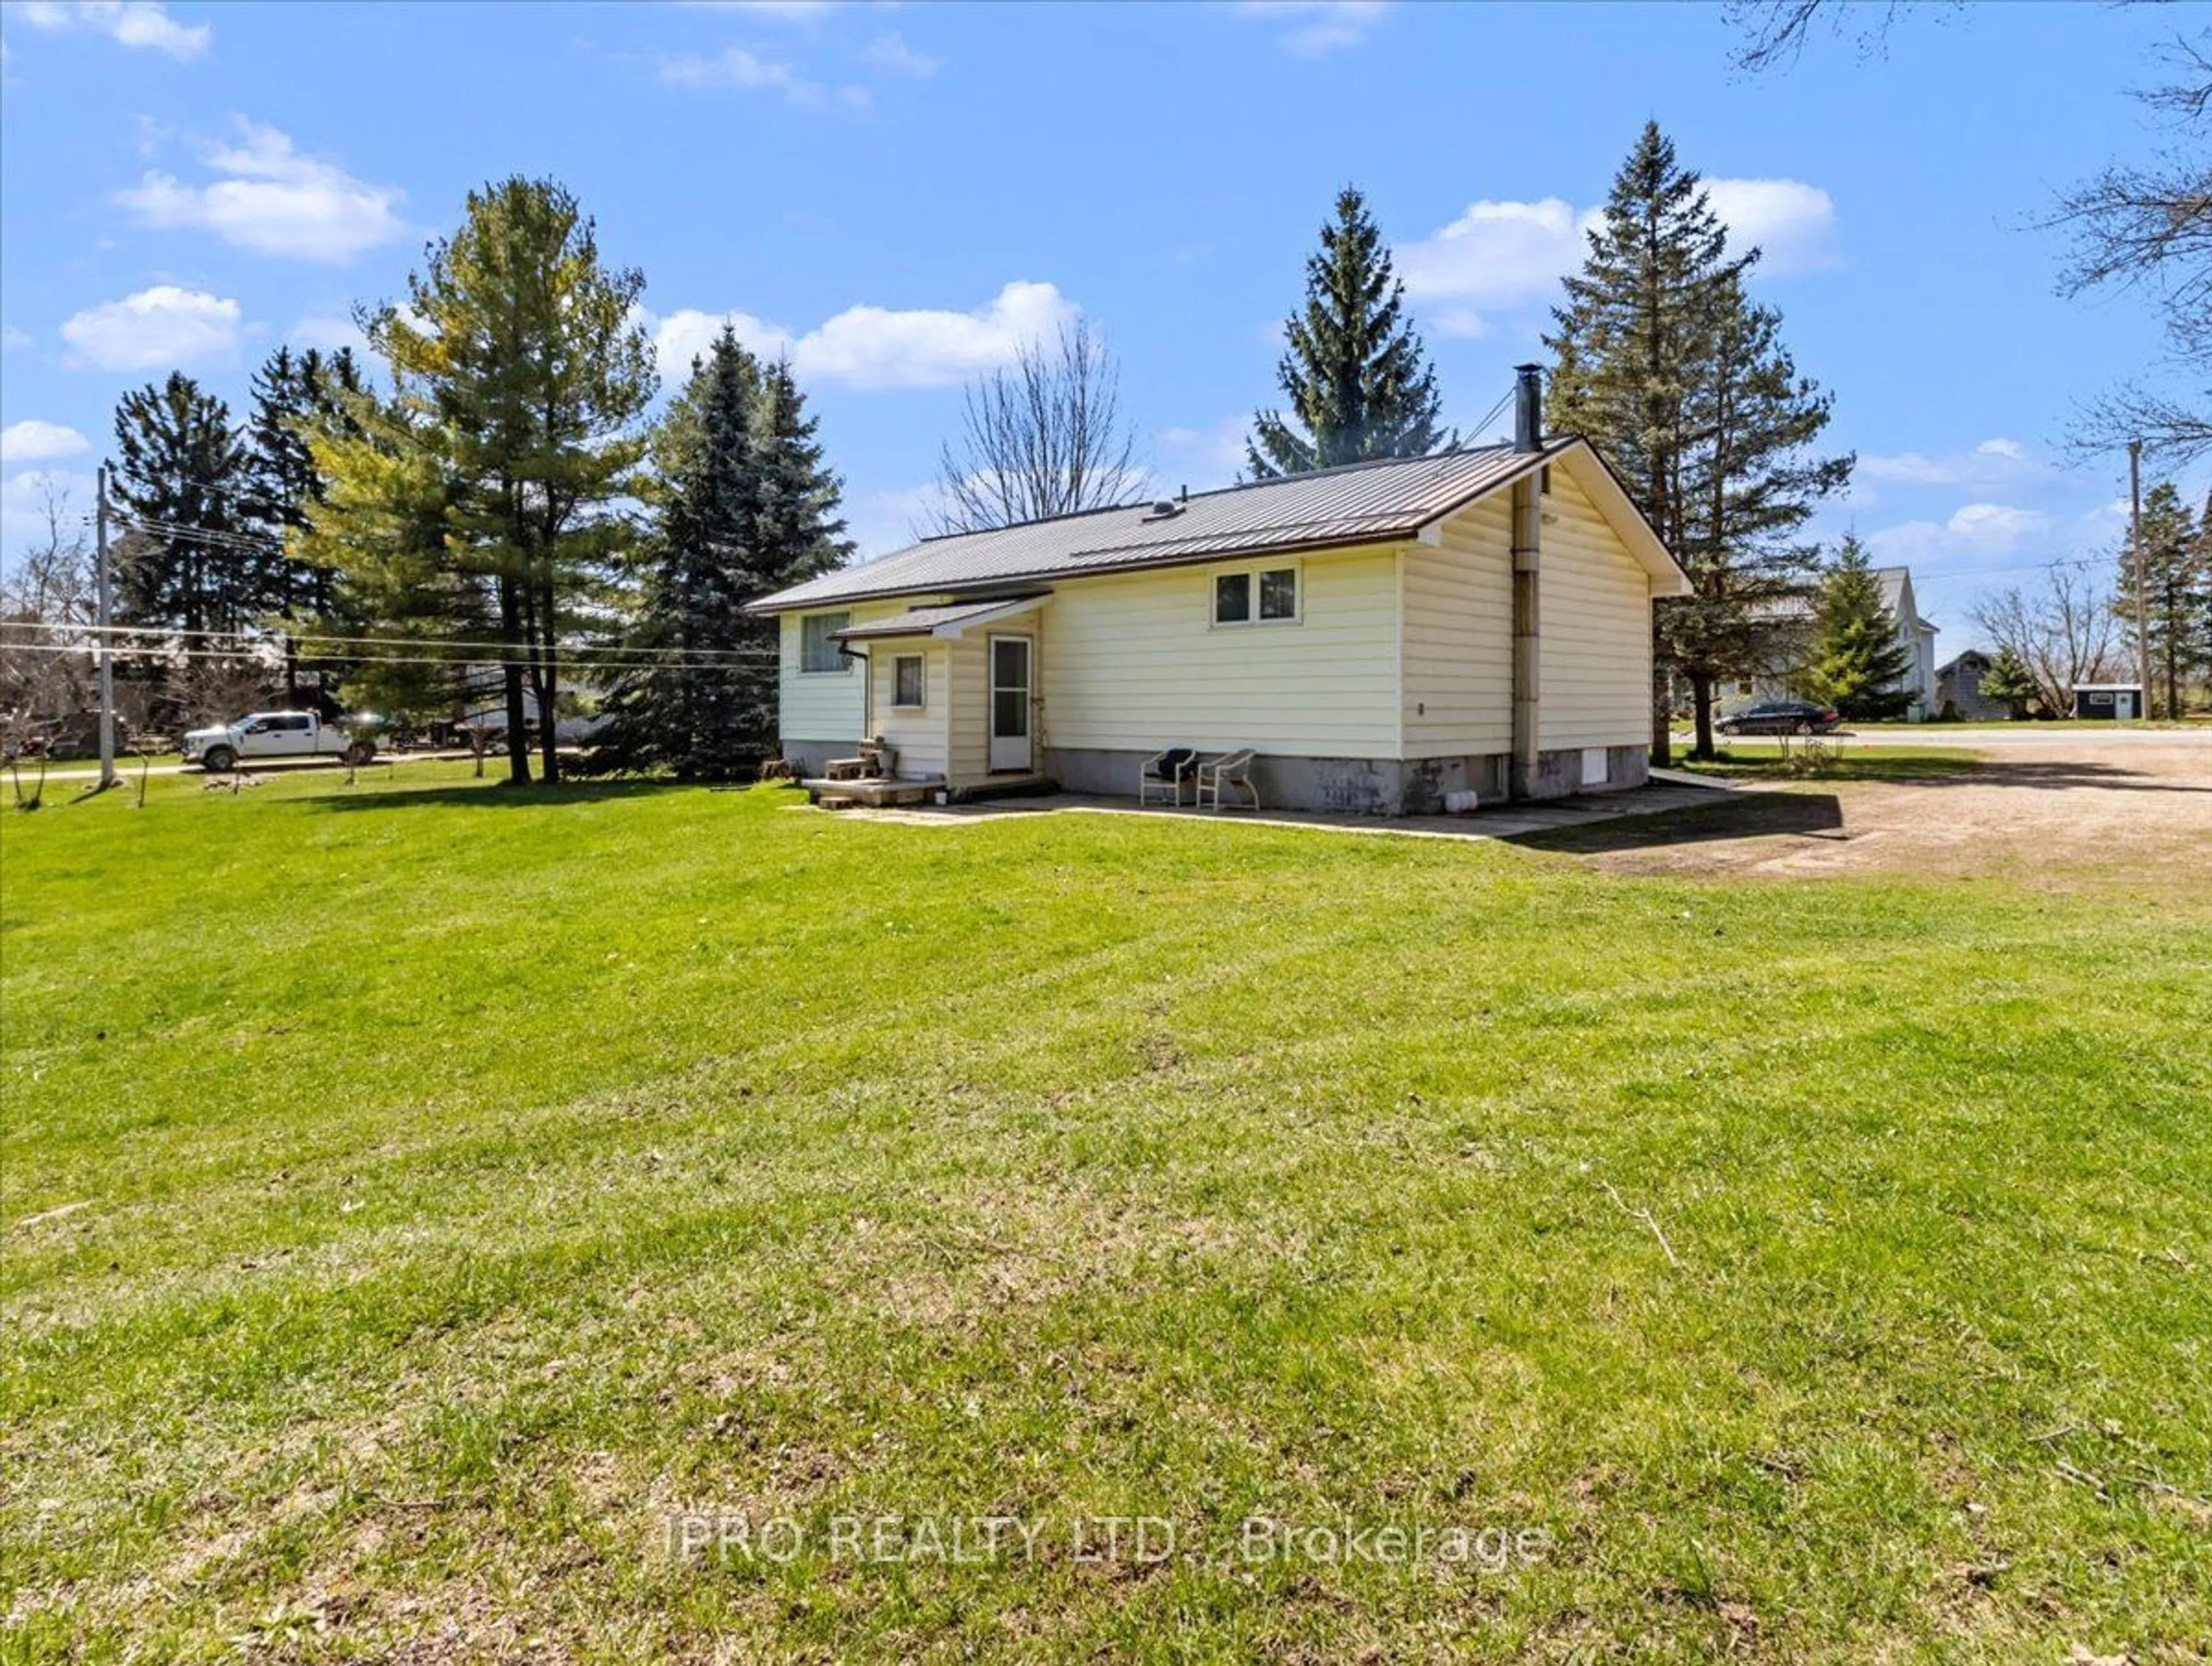 Frontside or backside of a home for 316097 Hwy 6, Chatsworth Ontario N0H 2R0